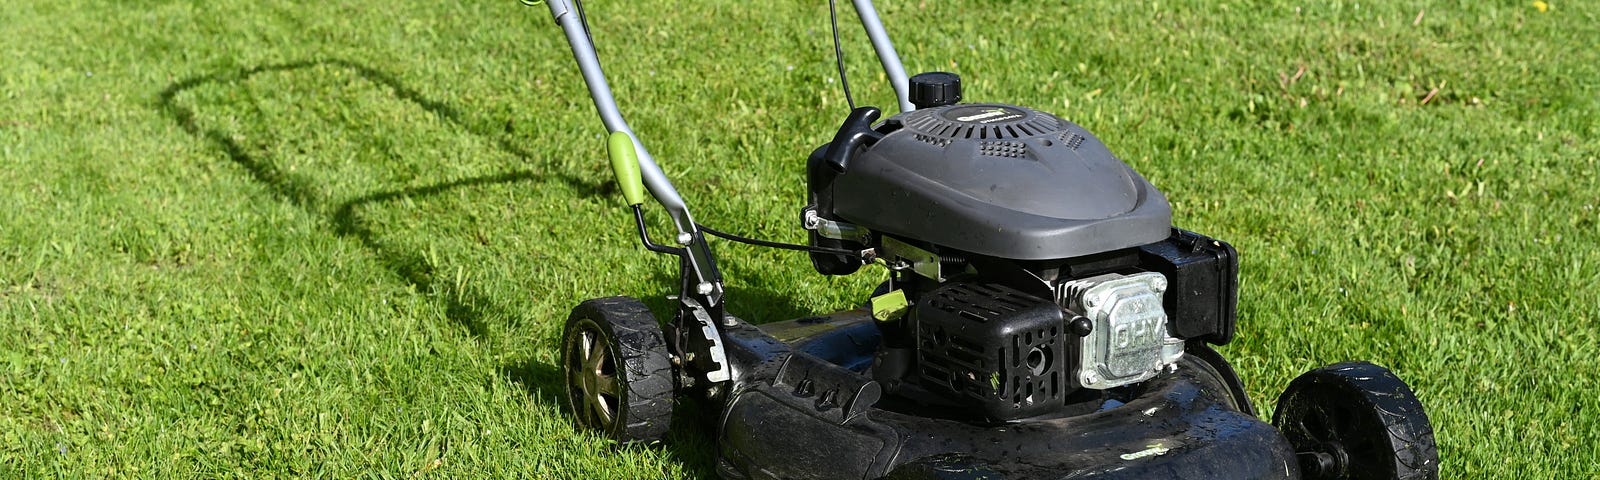 Black lawnmower, with a gas-powered engine, on a green lawn